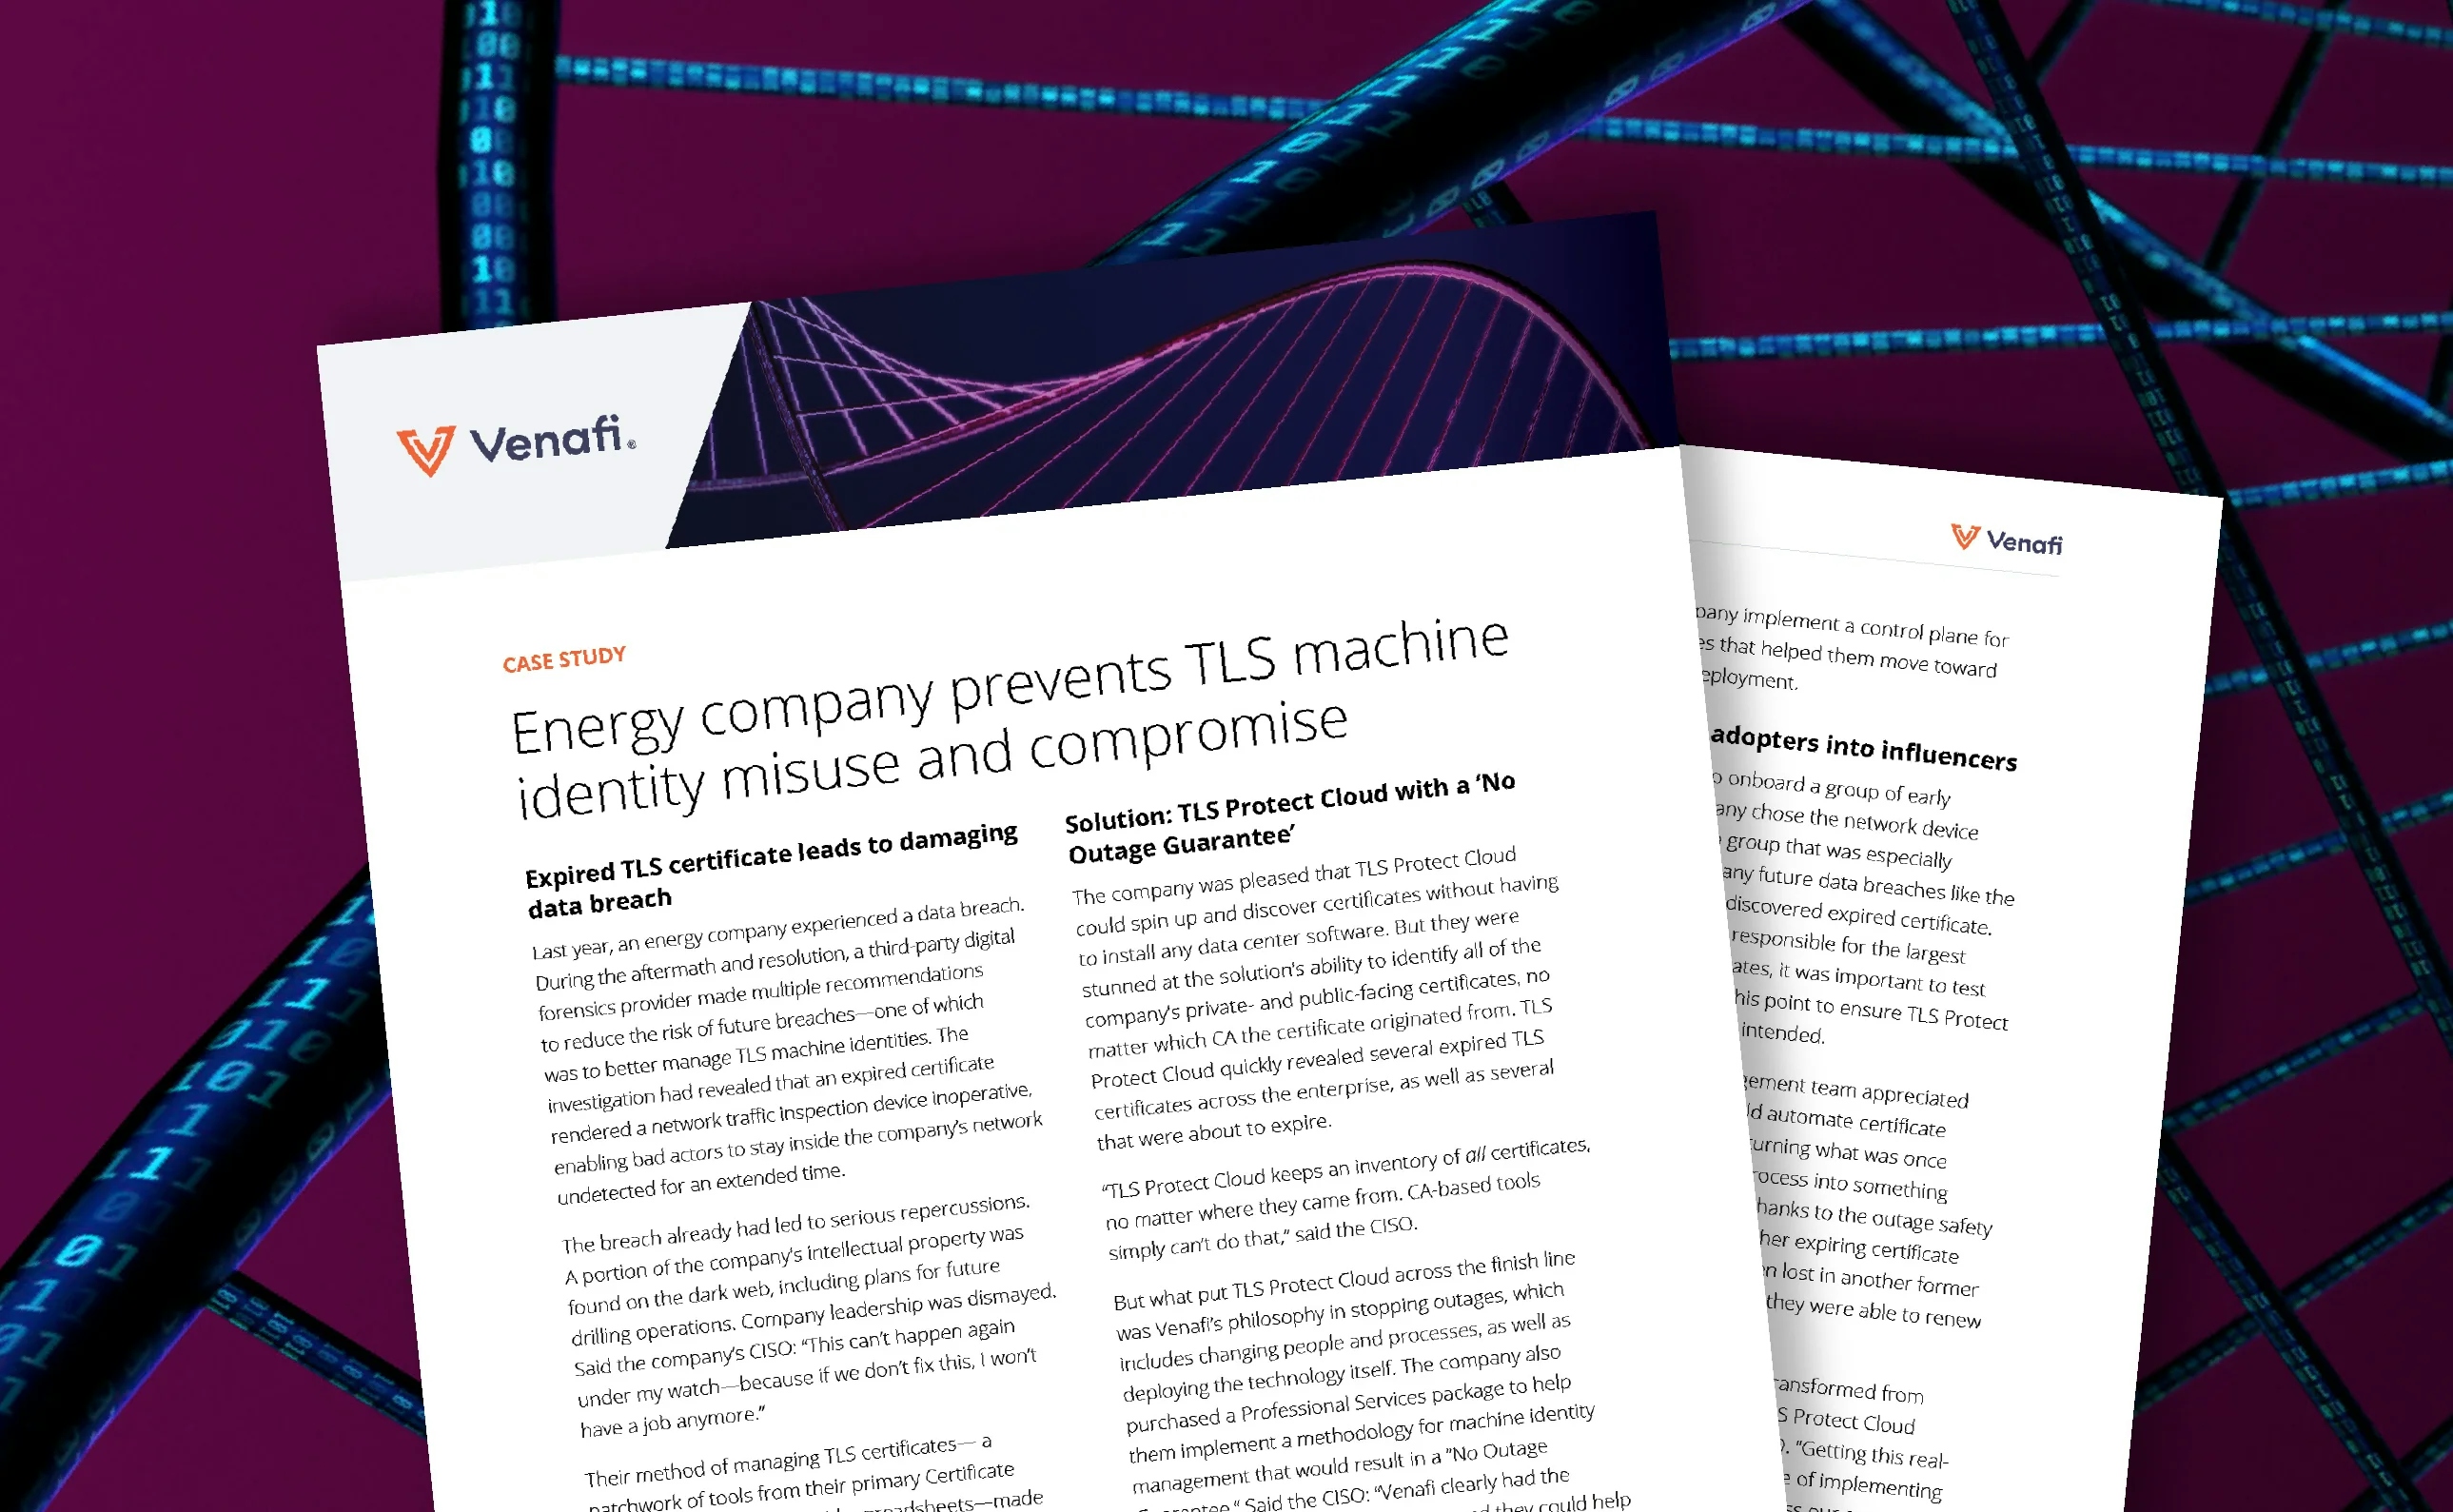 Energy company prevents TLS certificate misuse and compromise - cover graphic